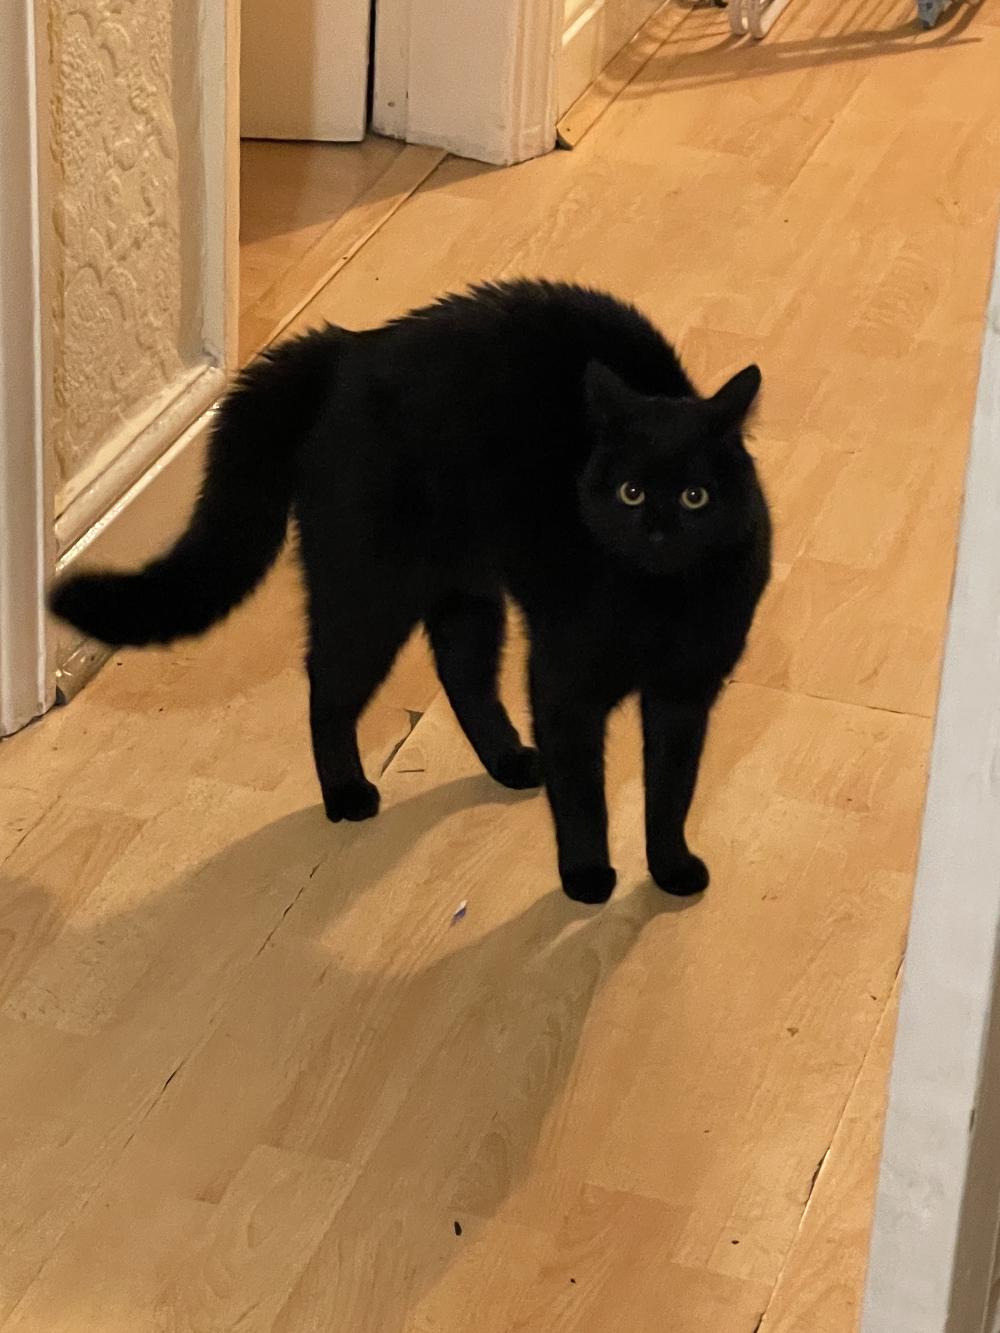 my own cat, Coco, black and fluffy and hair standing on end while she sideways-jumps todays my in the hallway'